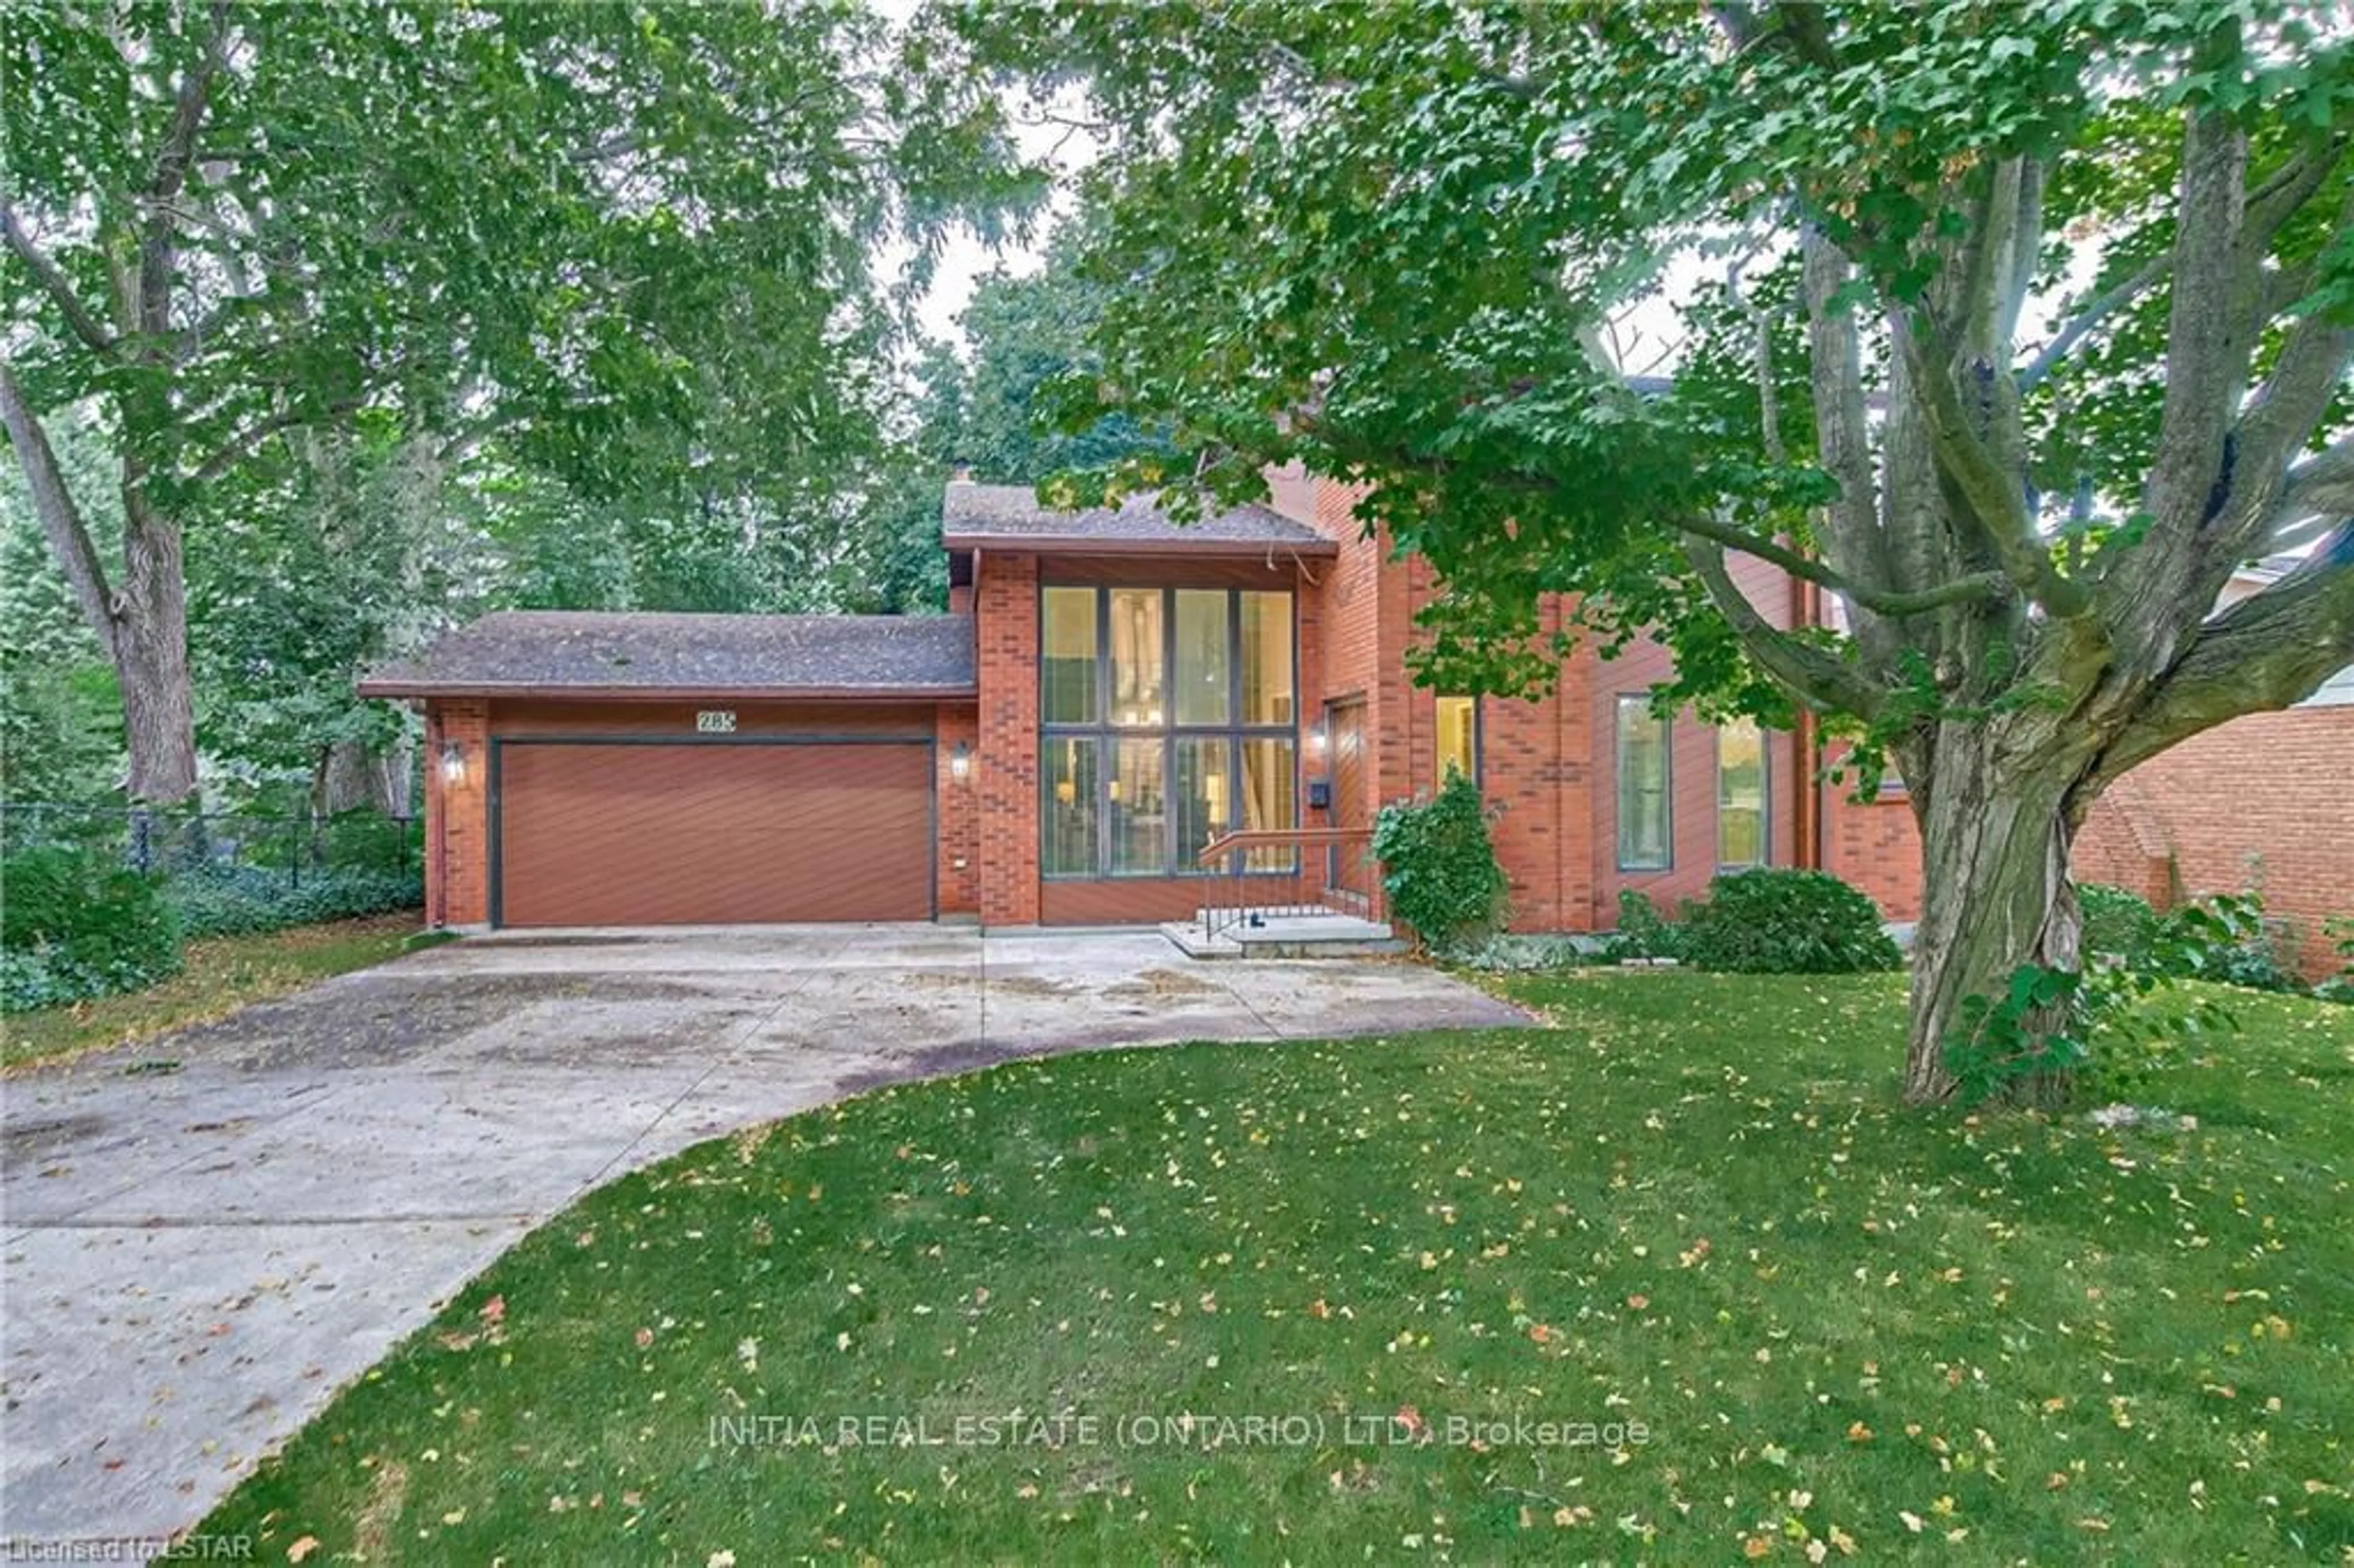 Home with brick exterior material for 285 Riverside Dr, London Ontario N6H 1G1